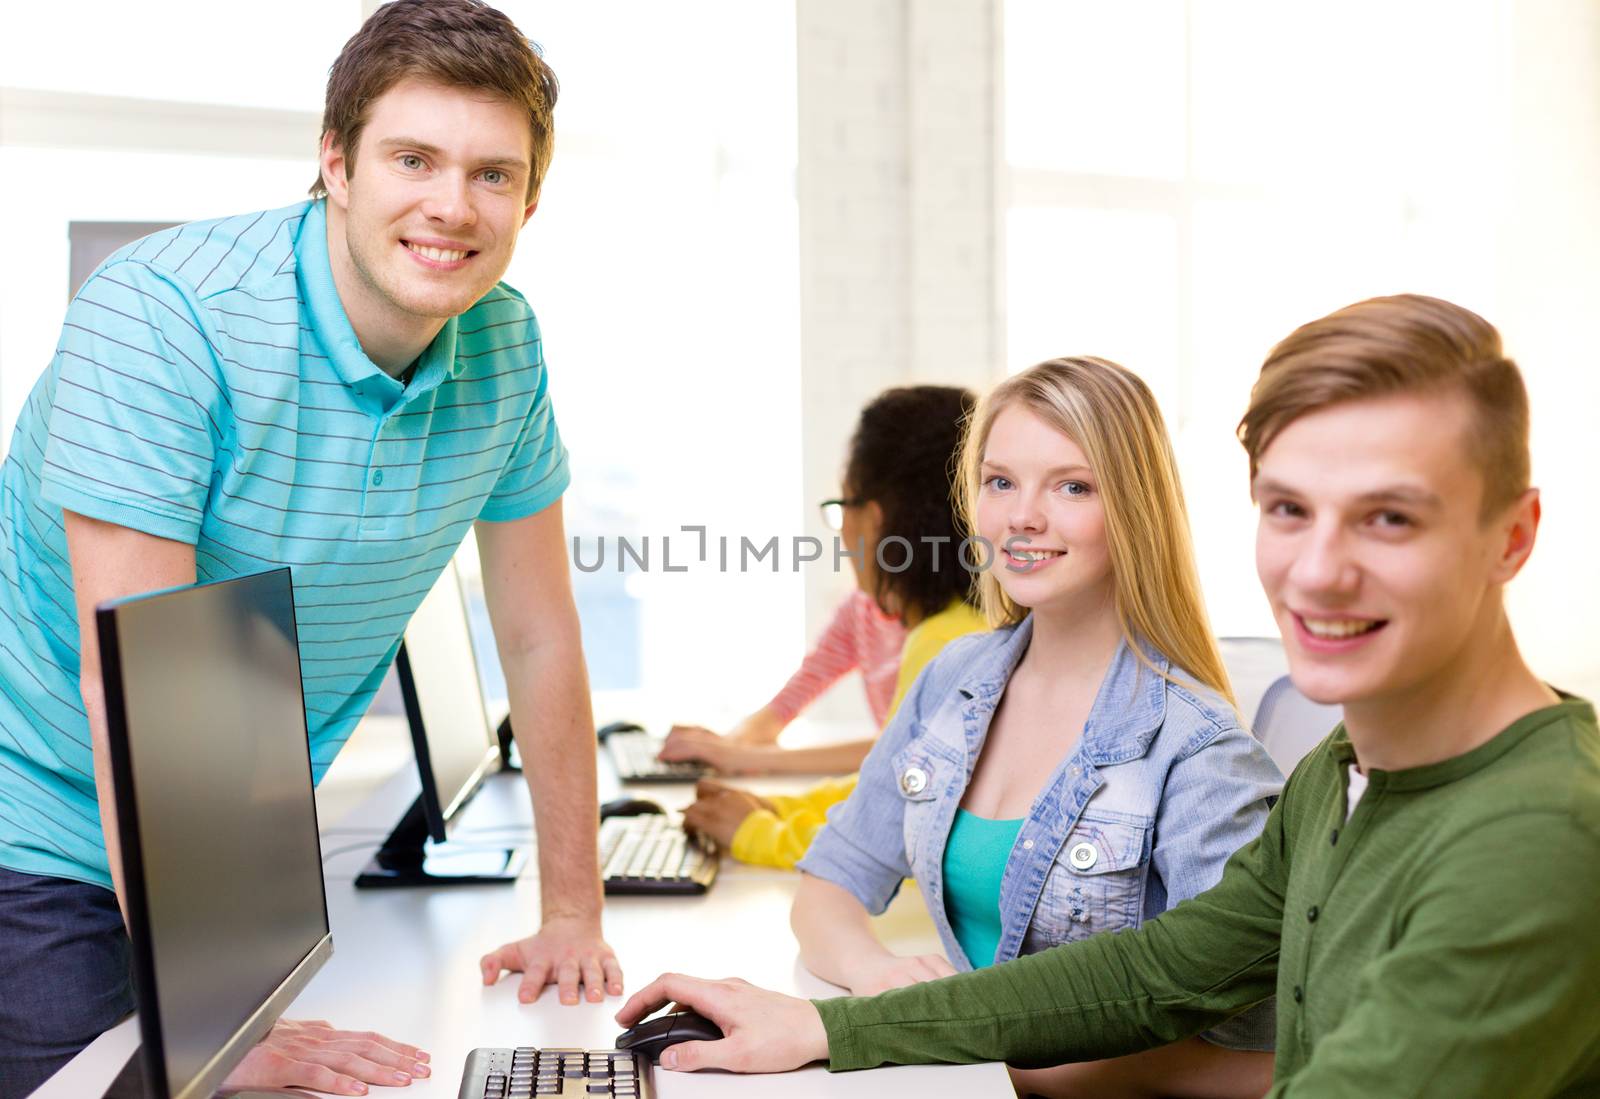 education, technology and school concept - group of smiling students in computer class